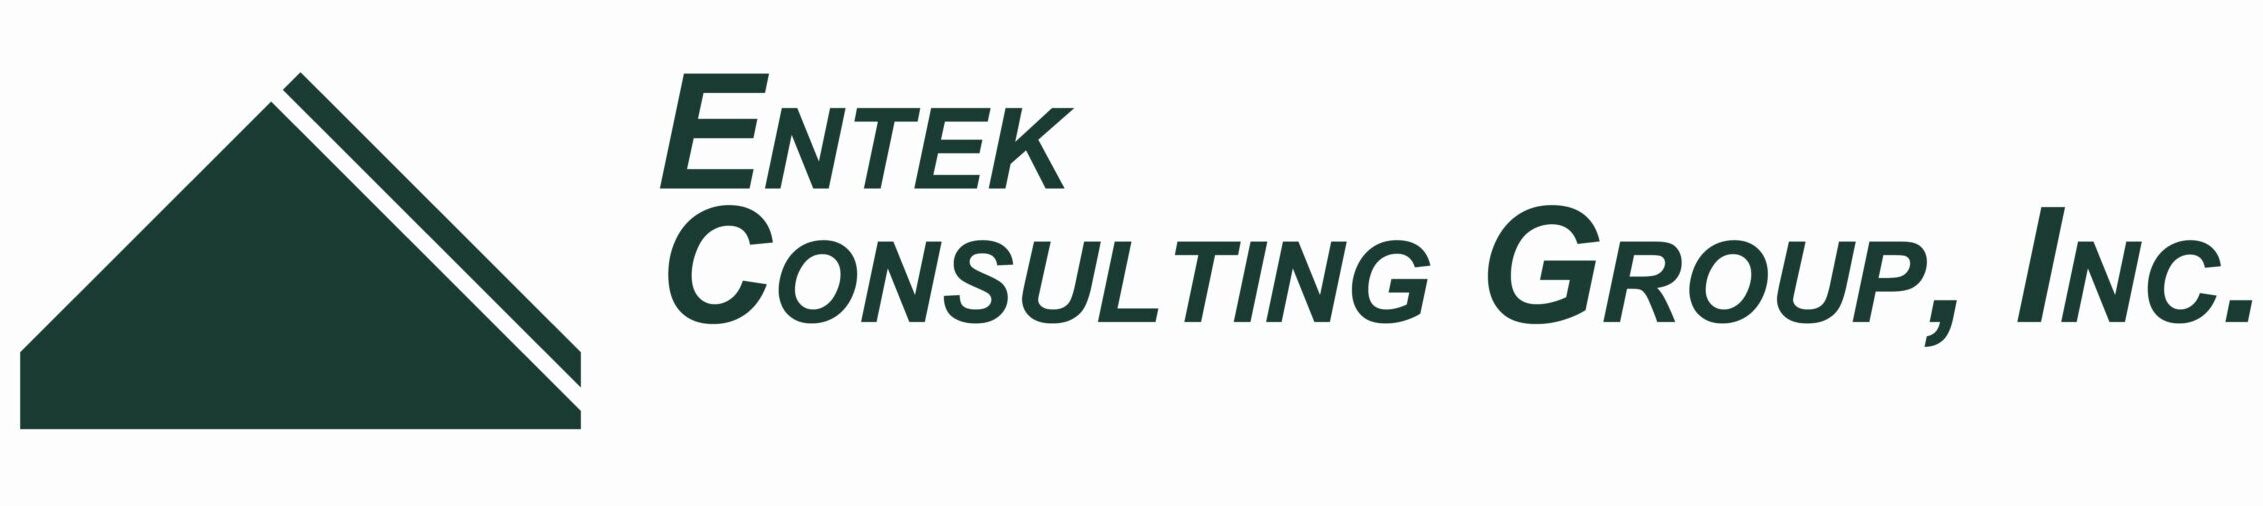 ENTEK Consulting Group, Inc.